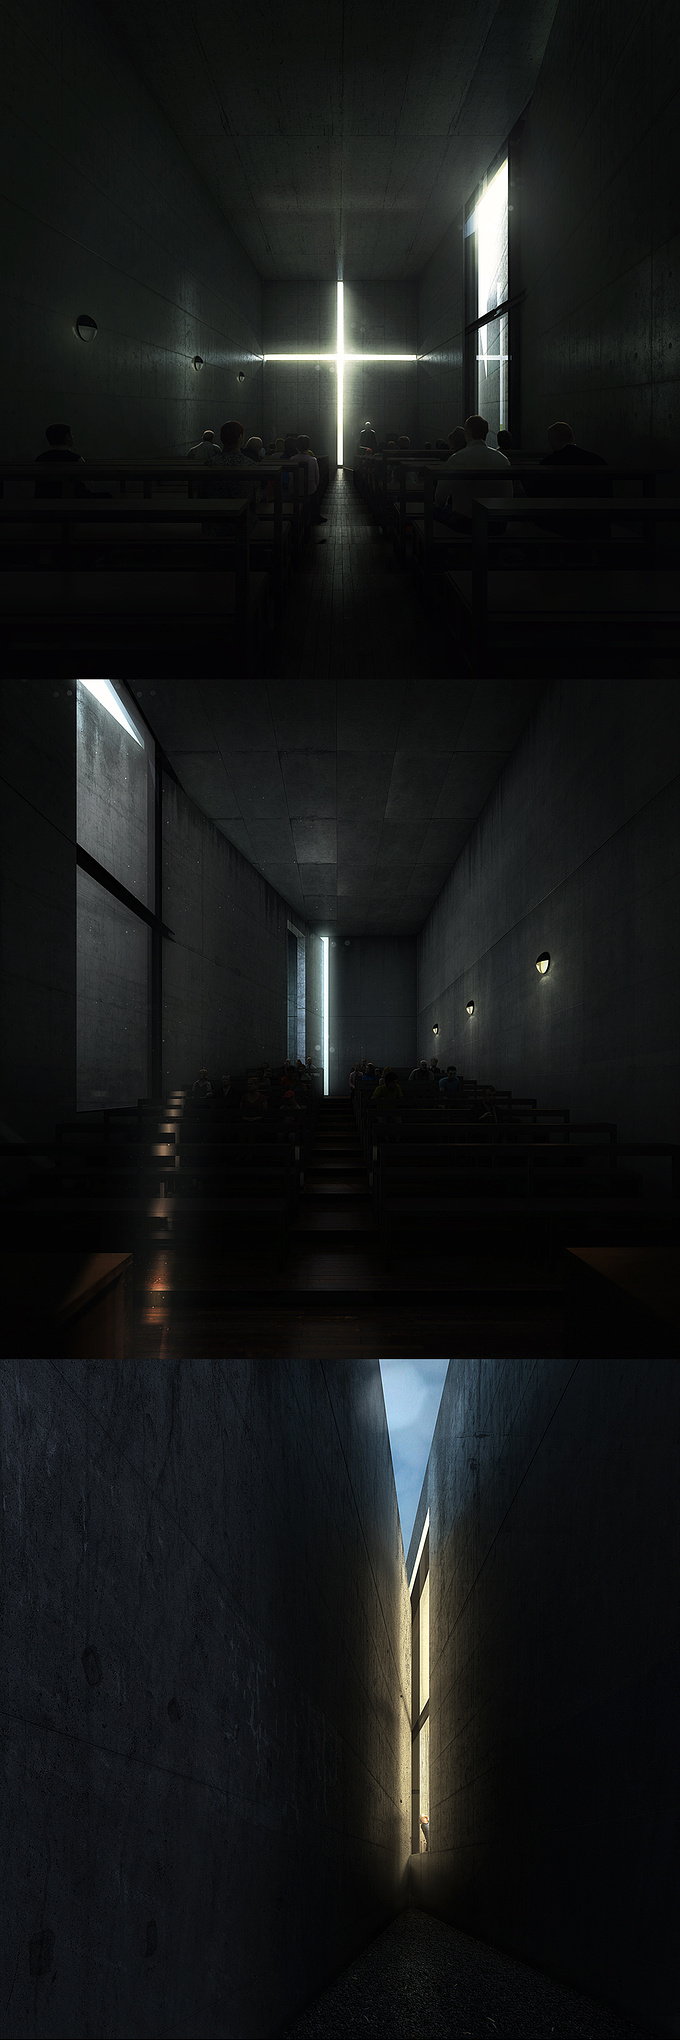 freelance - personal - 
 freelance - personal
 
 
 cinema 4d + photoshop

 

Hi! I know it's a cliché project but I wanted to give it a shot and try to capture the amazing ambience and light from this amazing project.
Church of light - Tadao Ando
Model from google warehouse
Rendered with c4d
Post production with photoshop
thanks.